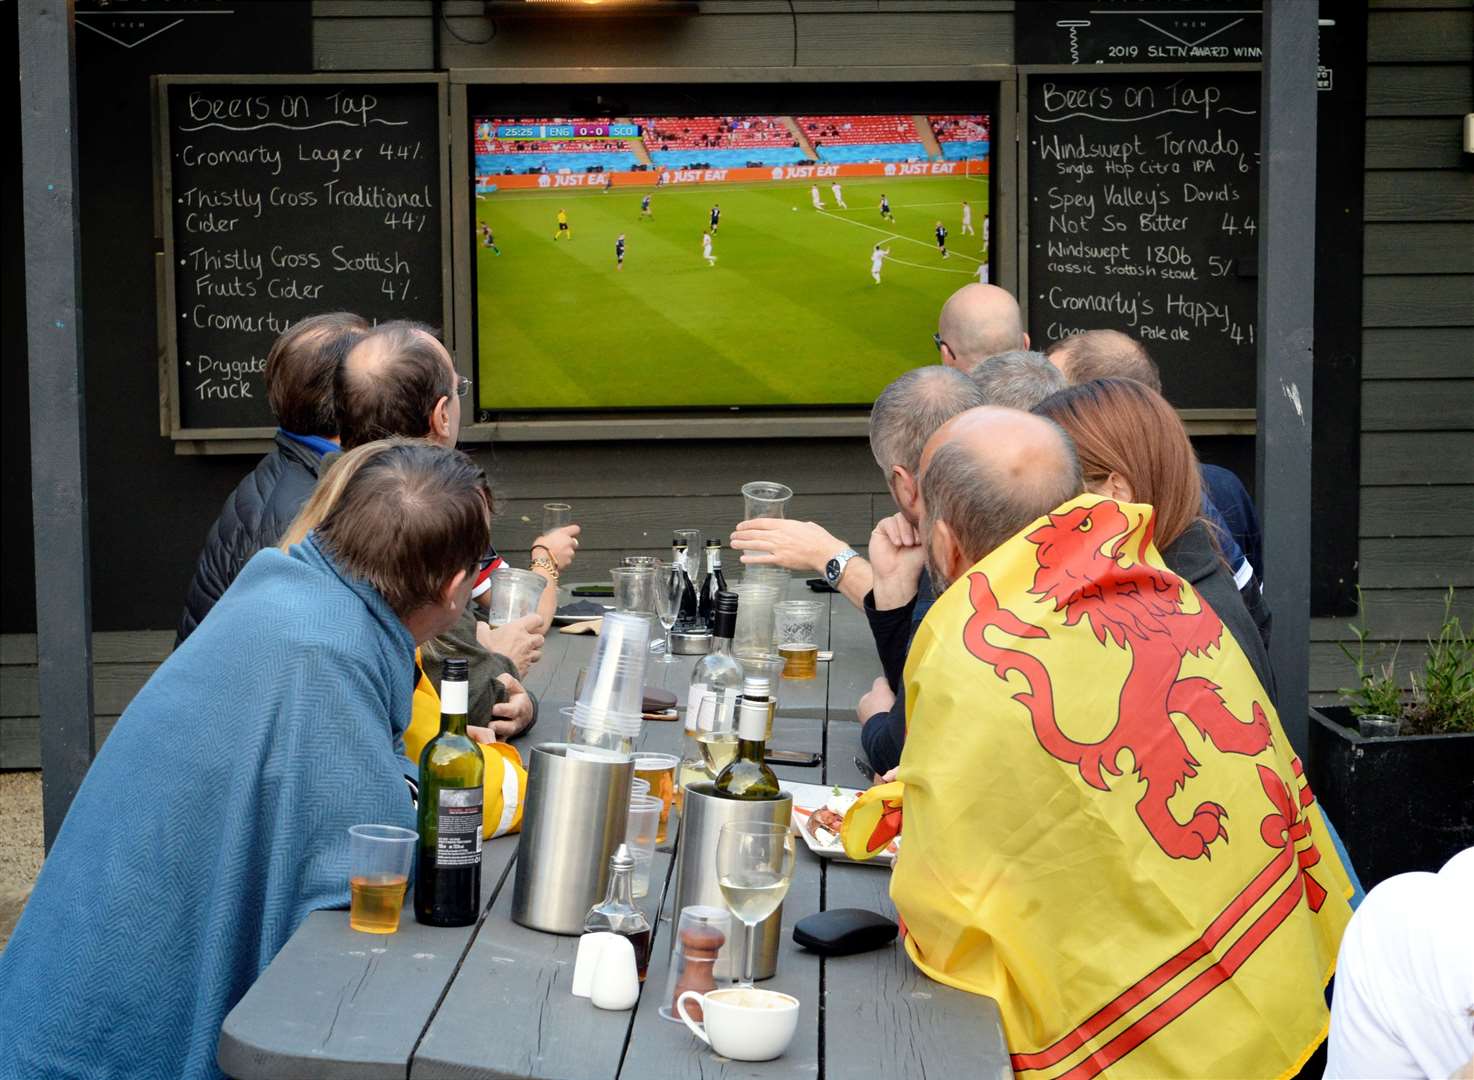 People watching the Scotland v England game in Euro 2020 (in June 2021!) at MacGregor's.